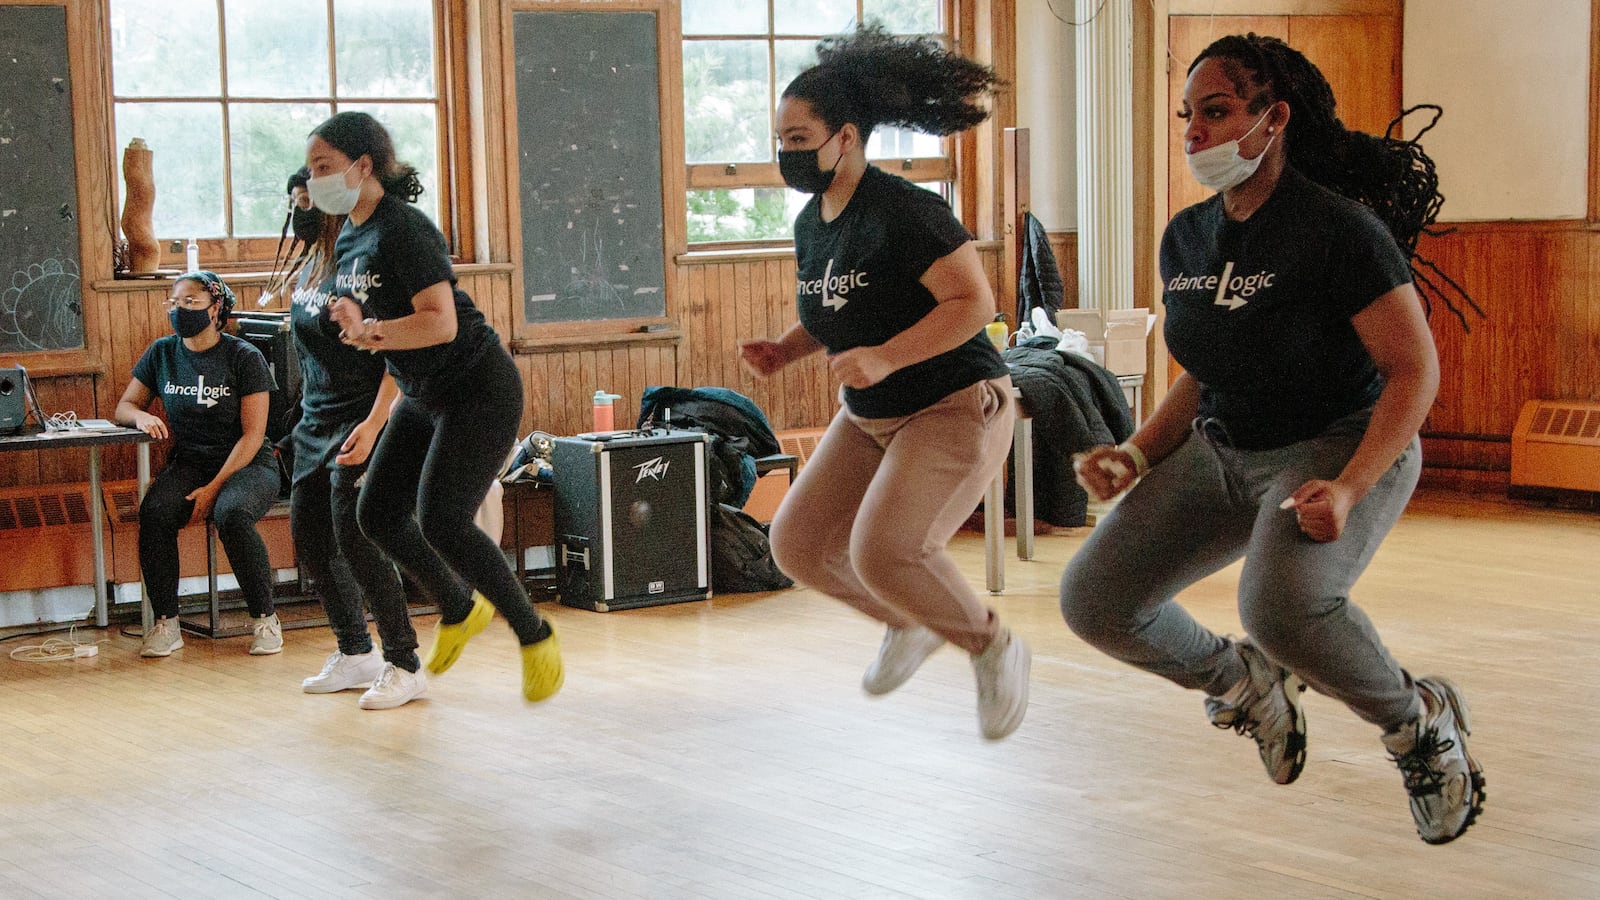 Girls wearing black shirts and face masks jump high over a wooden floor during class.